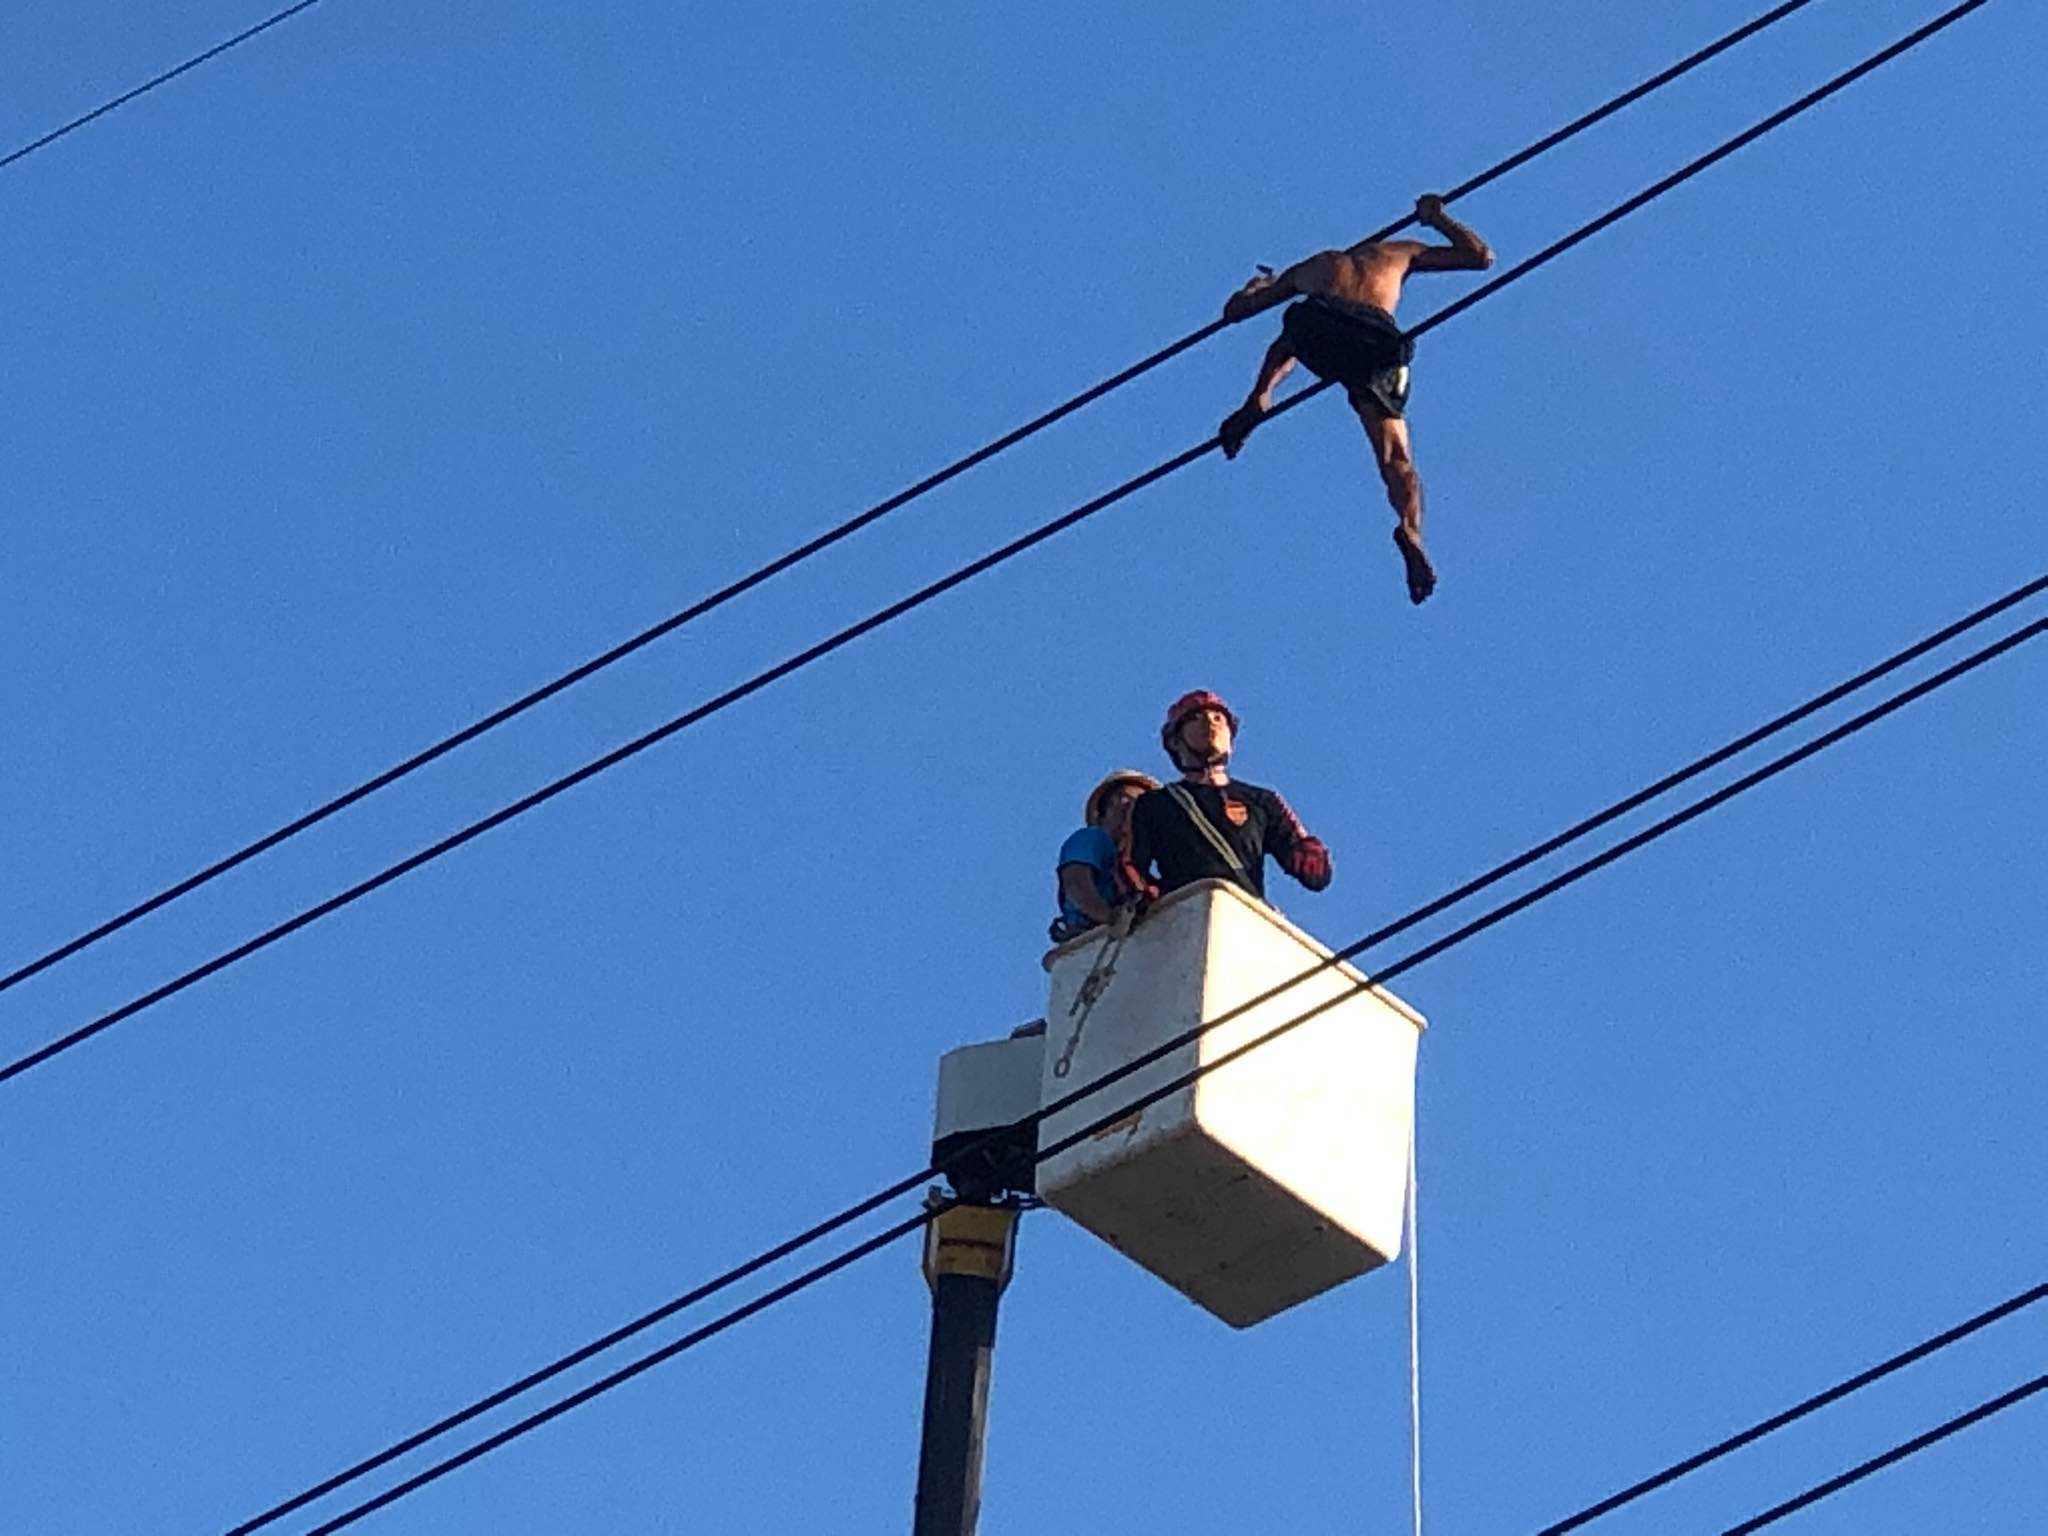 Marikina City Rescue saves man who climbed high electric post in Marikina after almost 30 hours